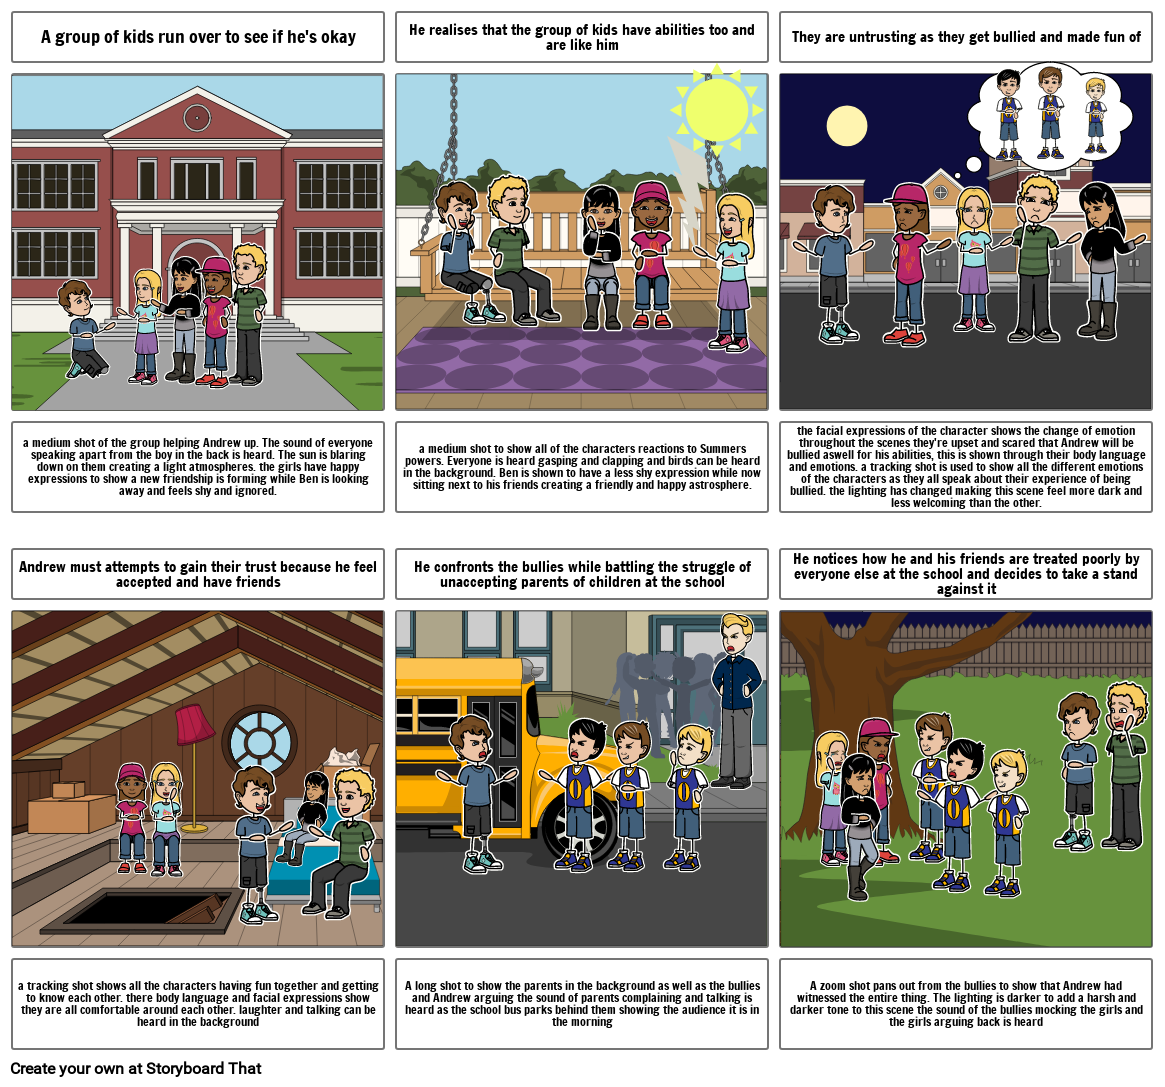 Media assessment 2 part 2 Storyboard by c16dfbbf